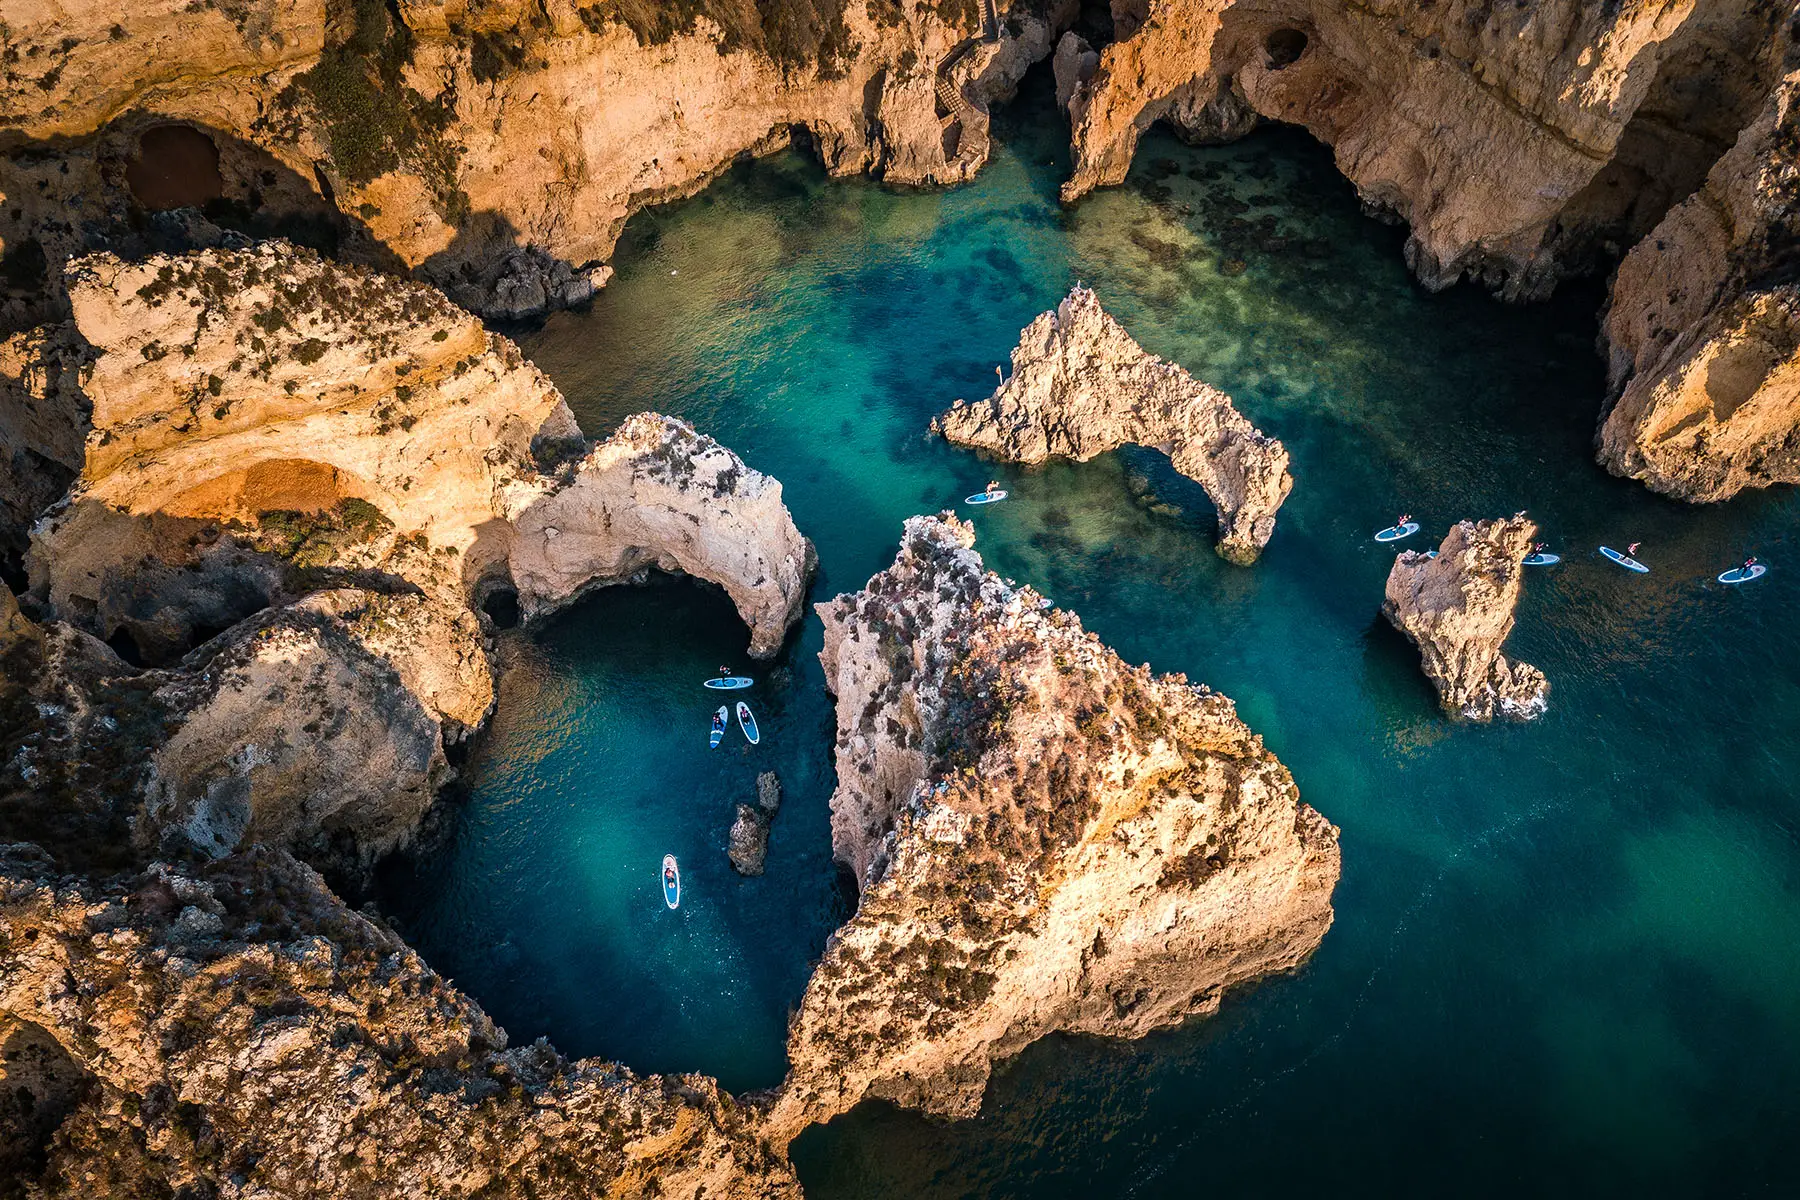 Paddle boarders on the water at Ponta da Piedade, Portugal